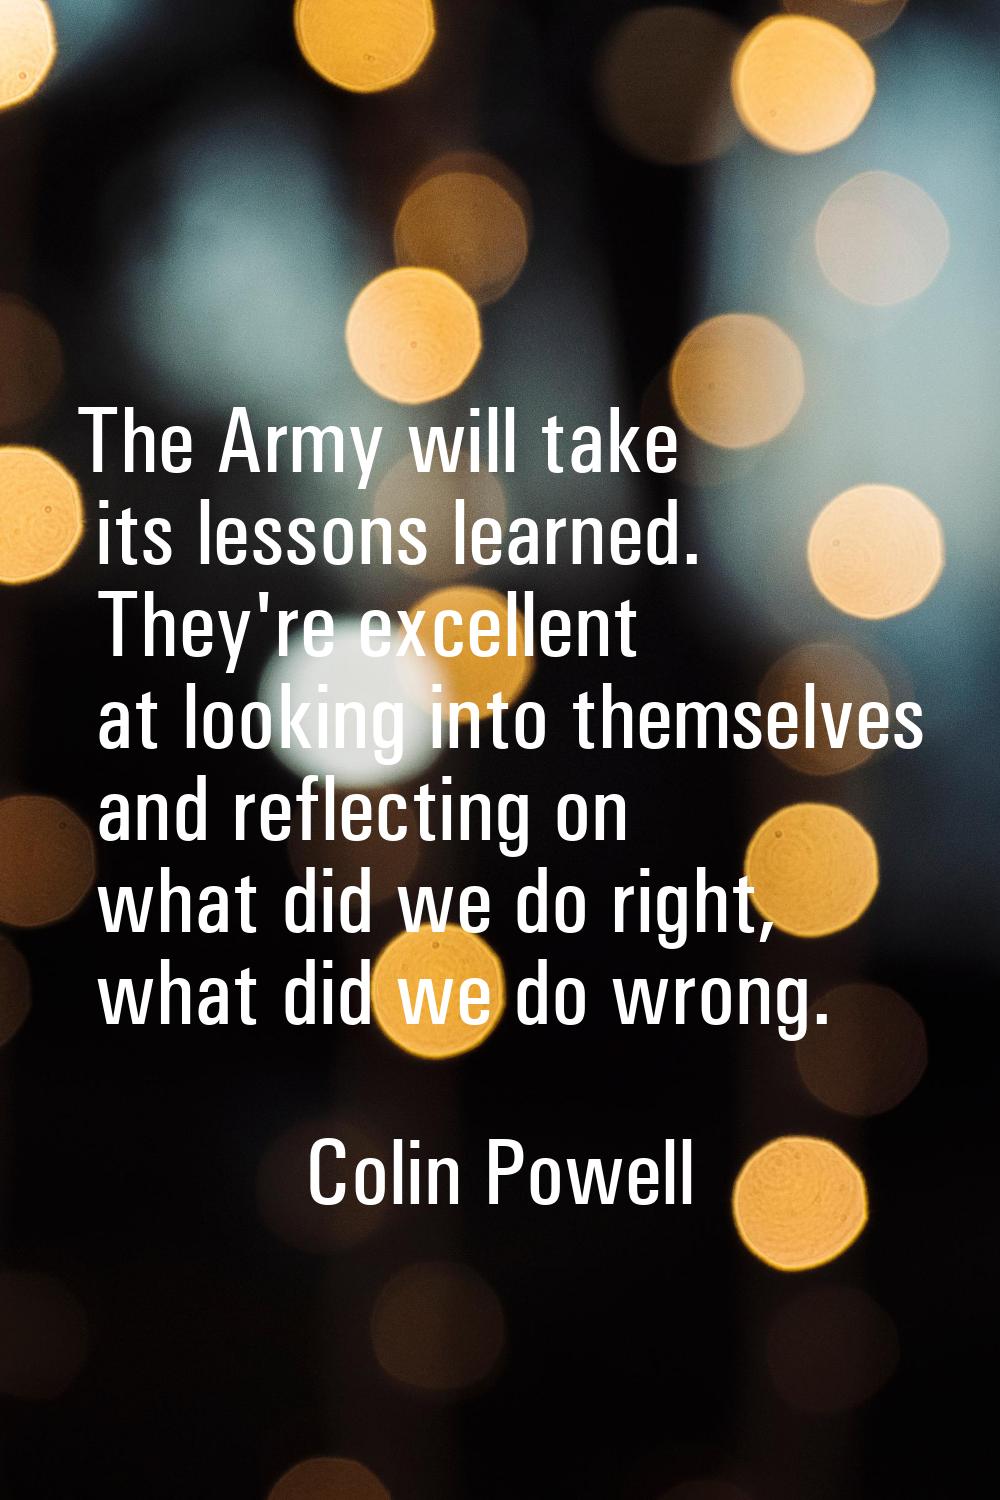 The Army will take its lessons learned. They're excellent at looking into themselves and reflecting